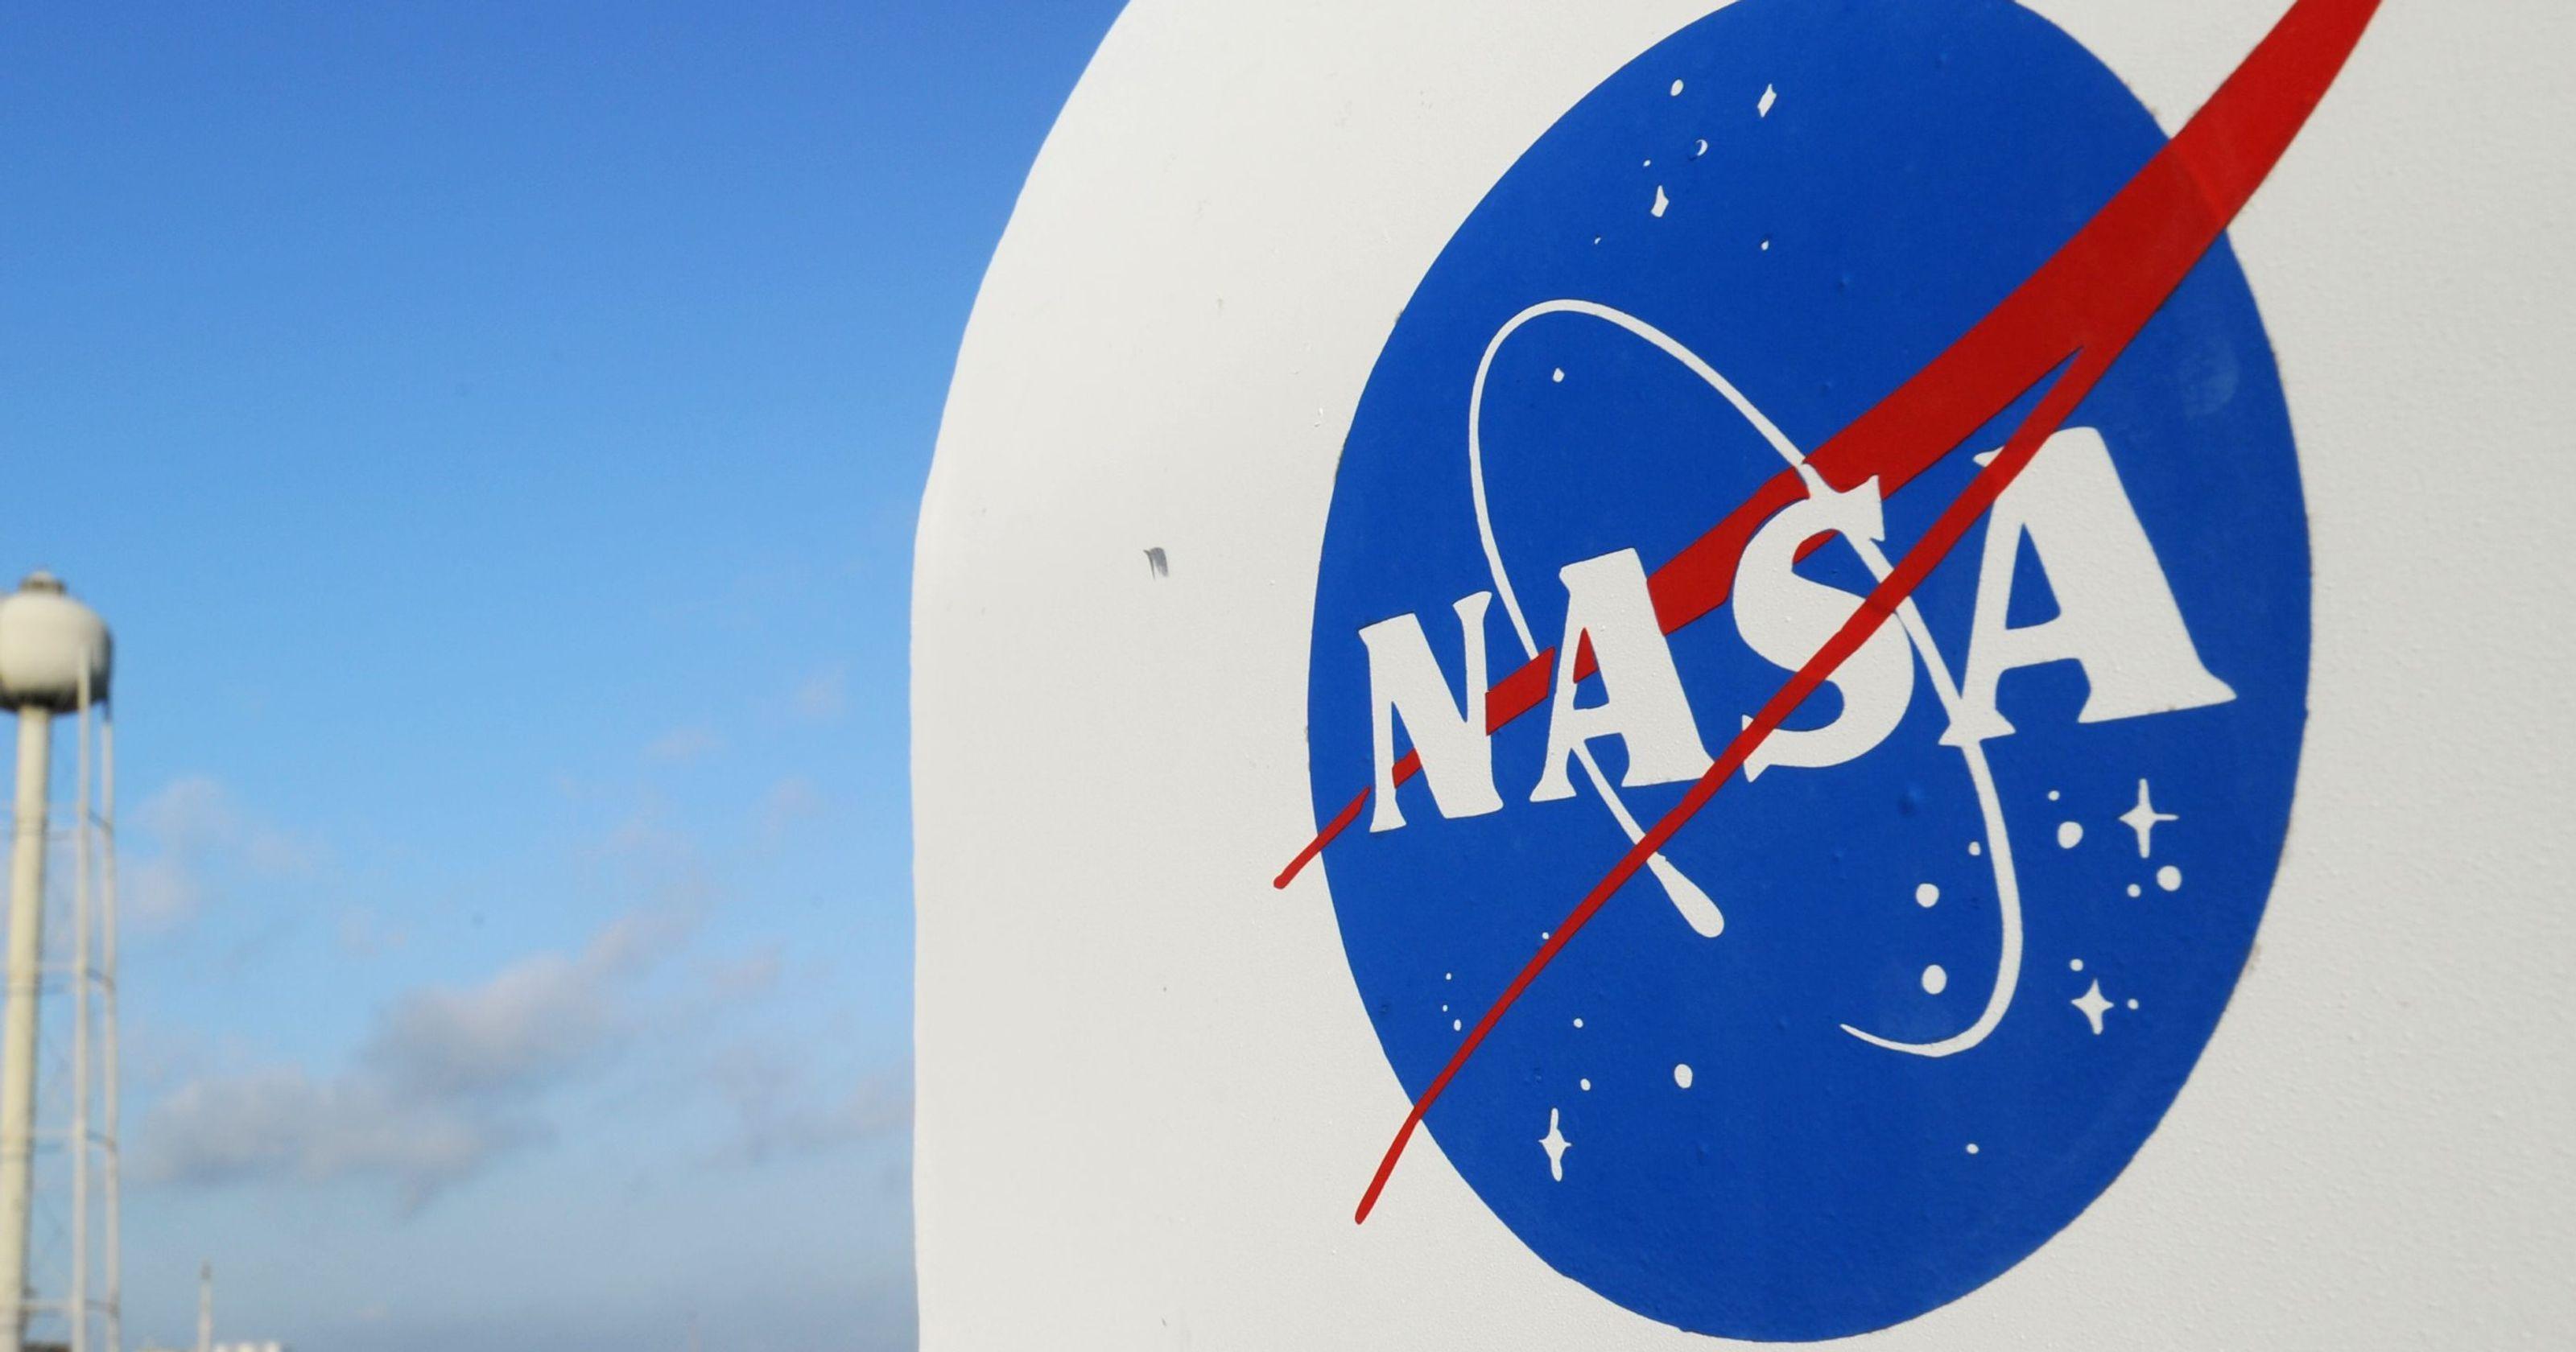 NASA Girl Logo - Teen finalists in NASA competition targeted by hackers